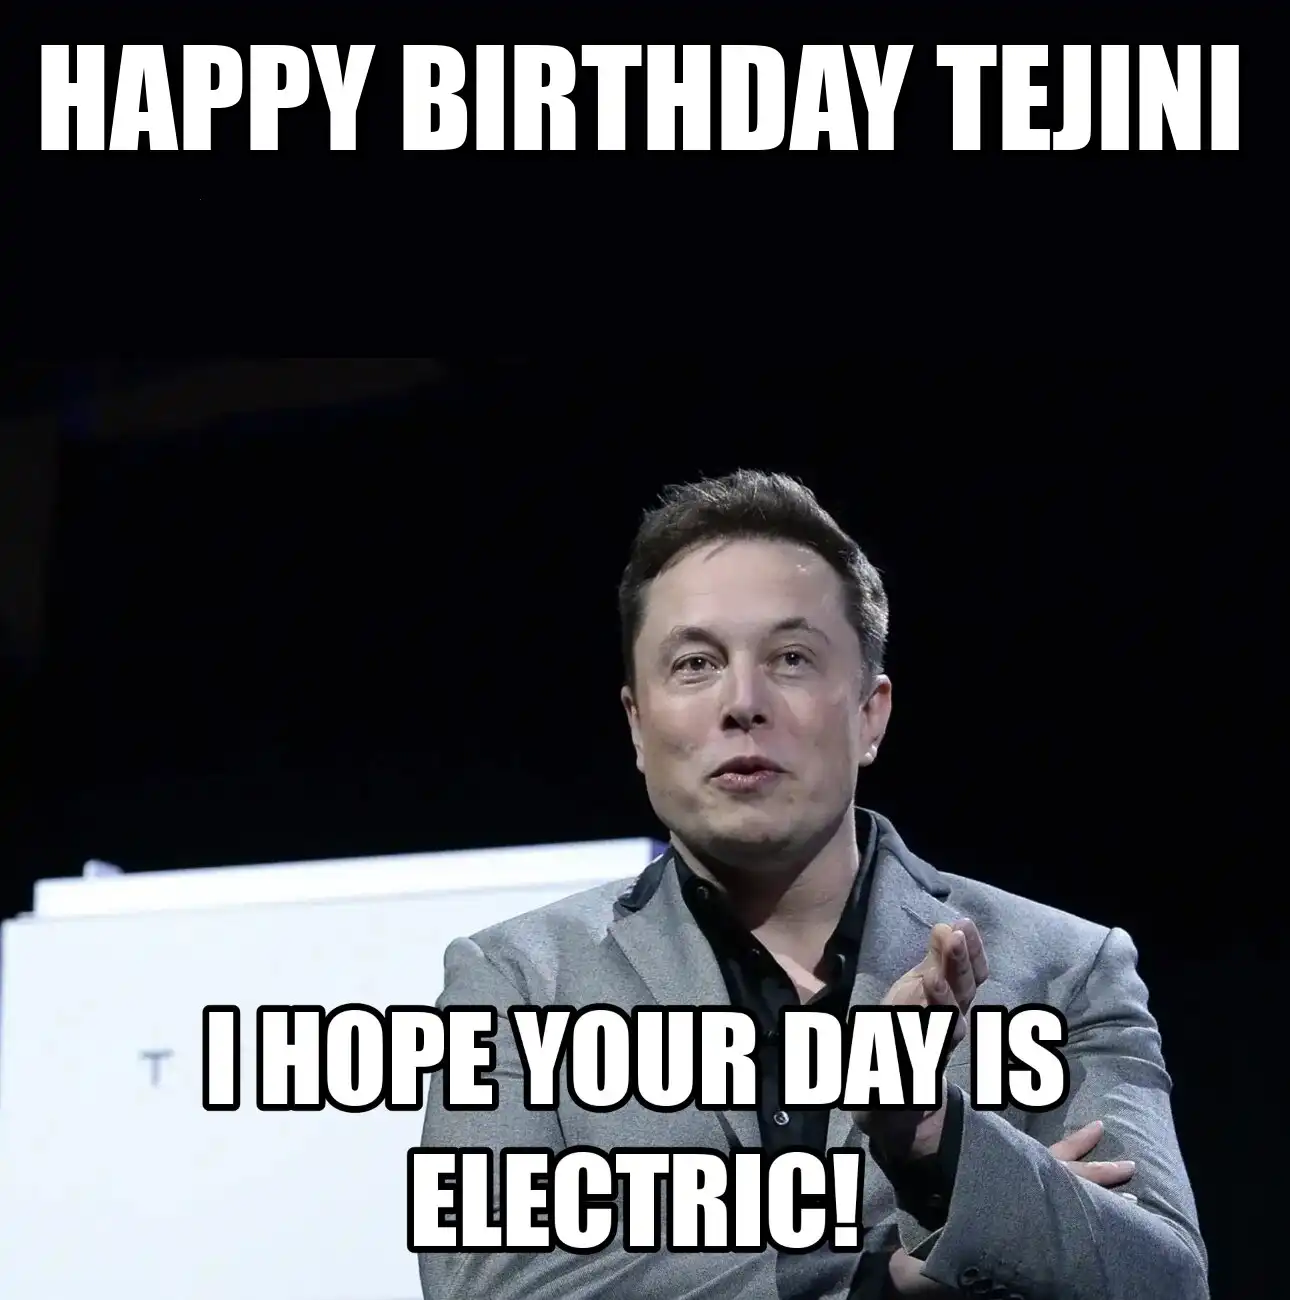 Happy Birthday Tejini I Hope Your Day Is Electric Meme